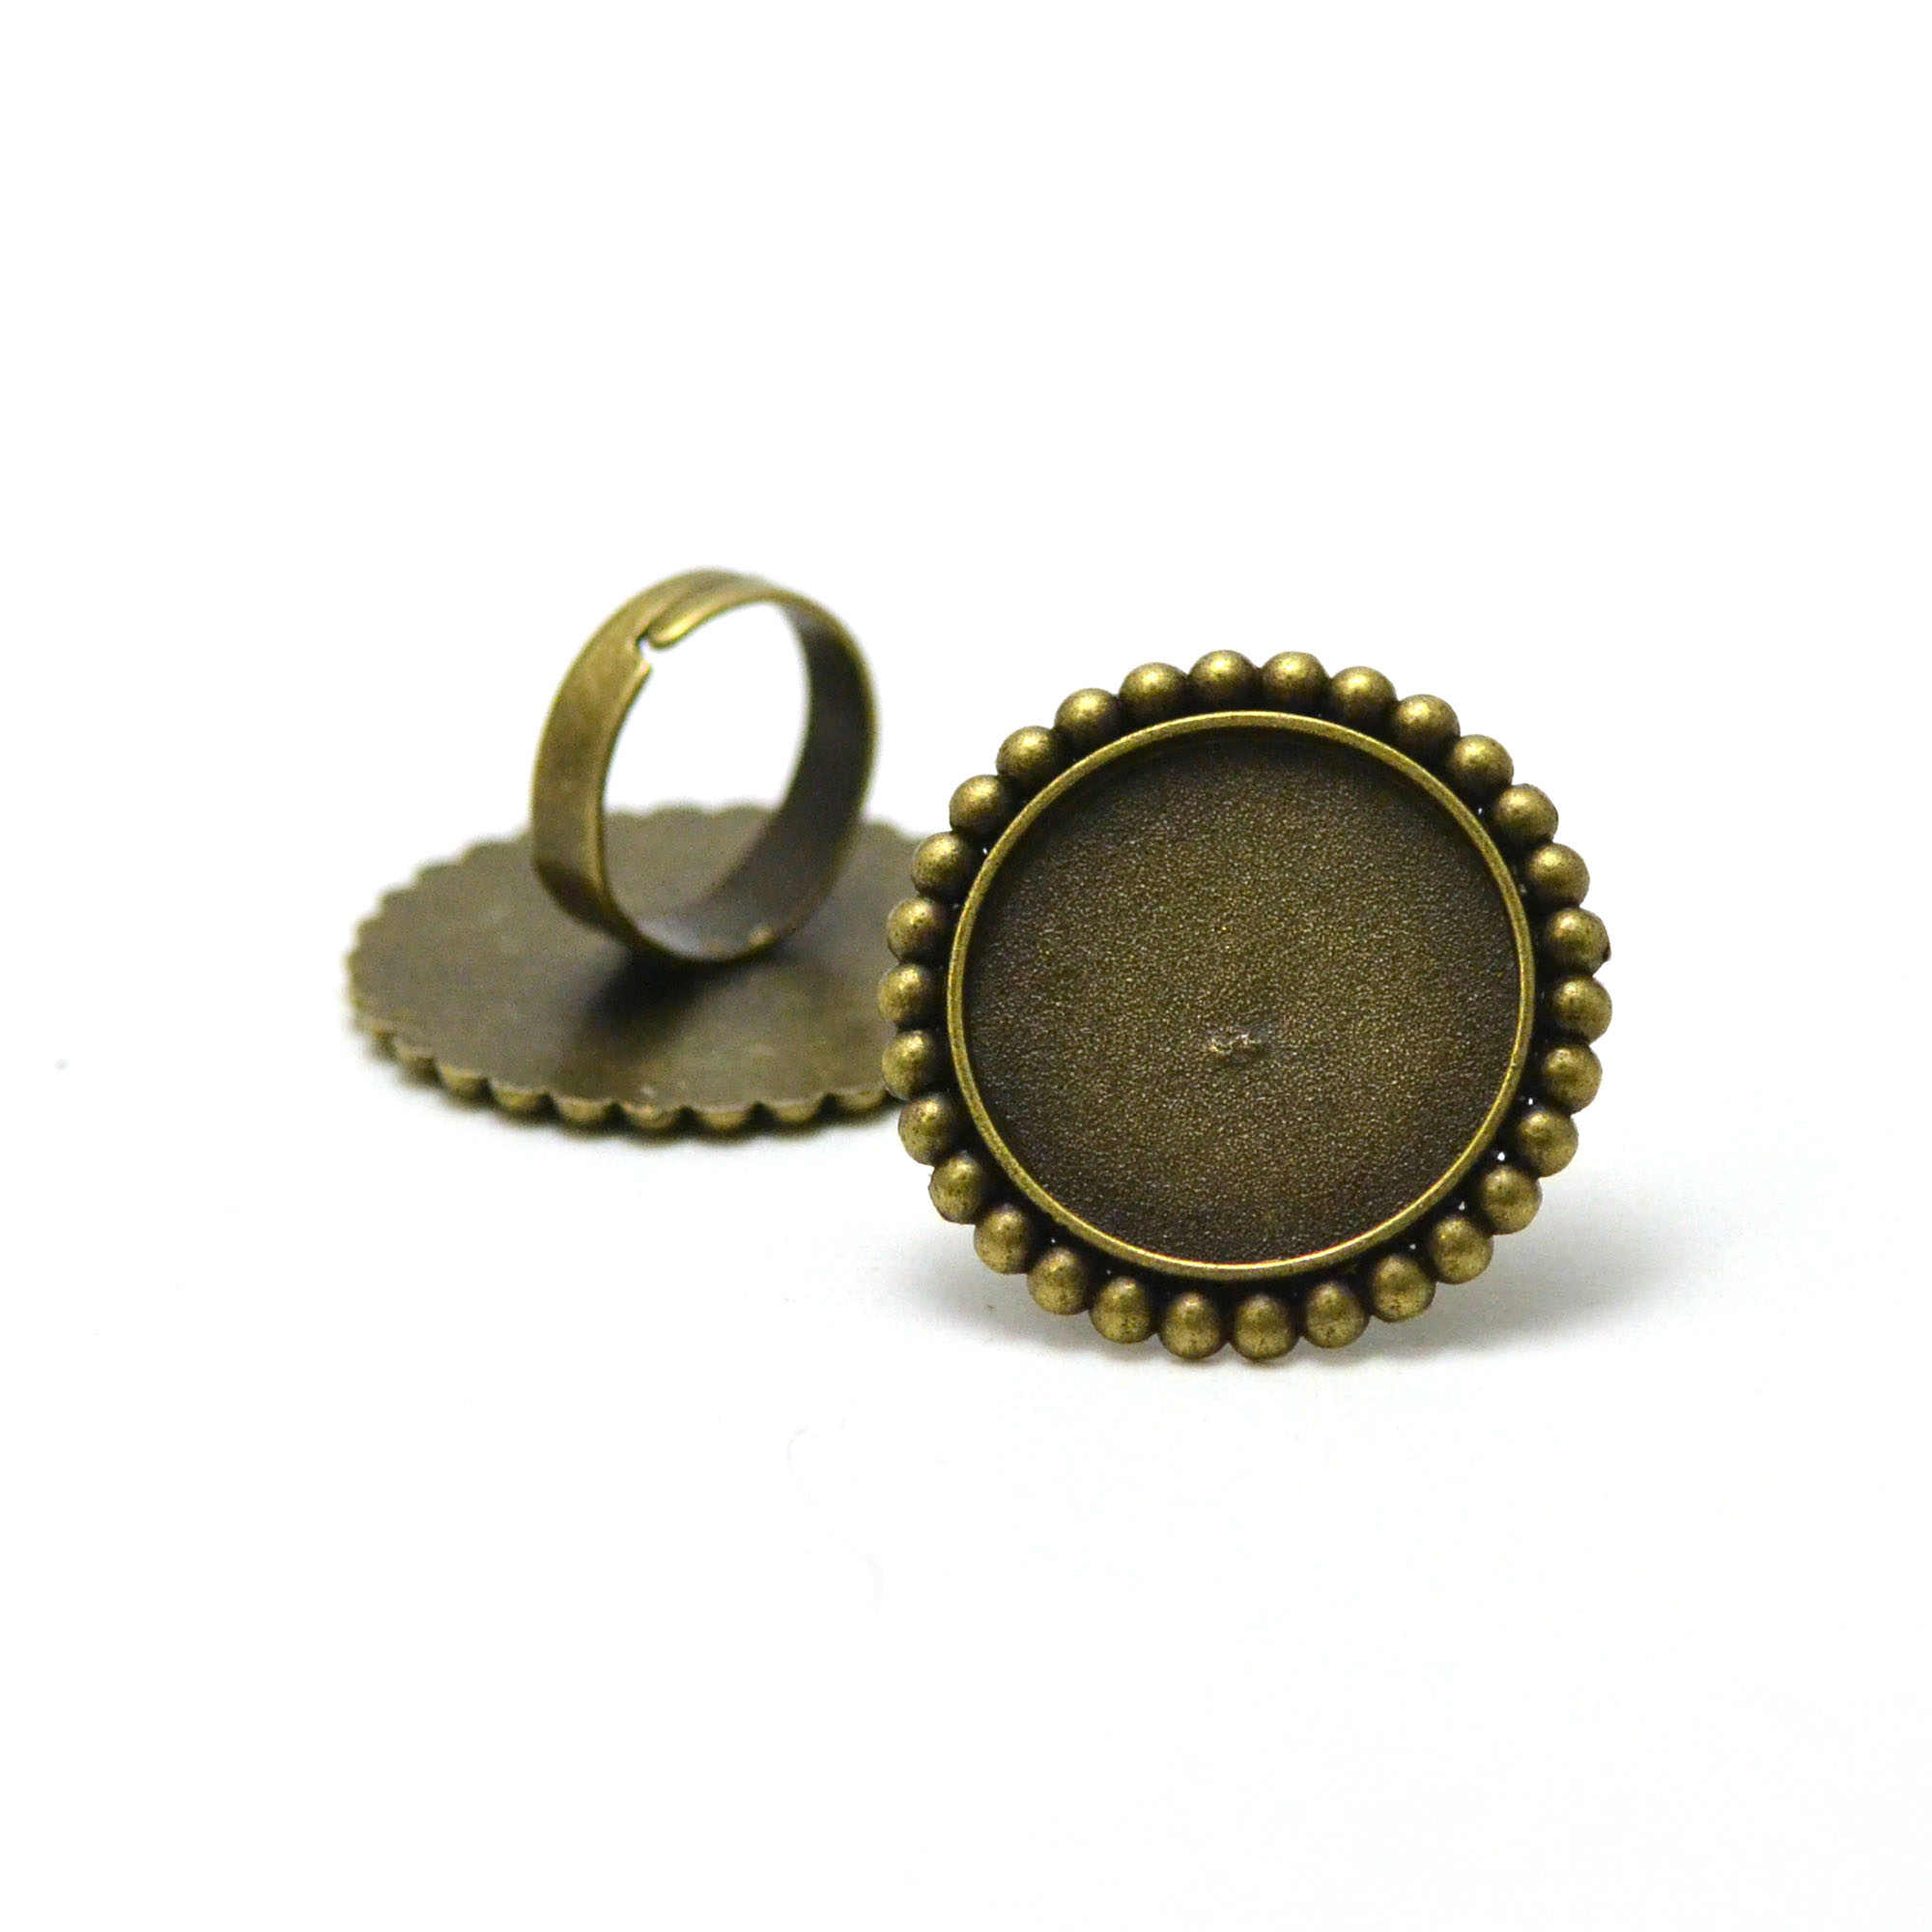 2 supports cabochons bague 25 mm ronde 016, bronze